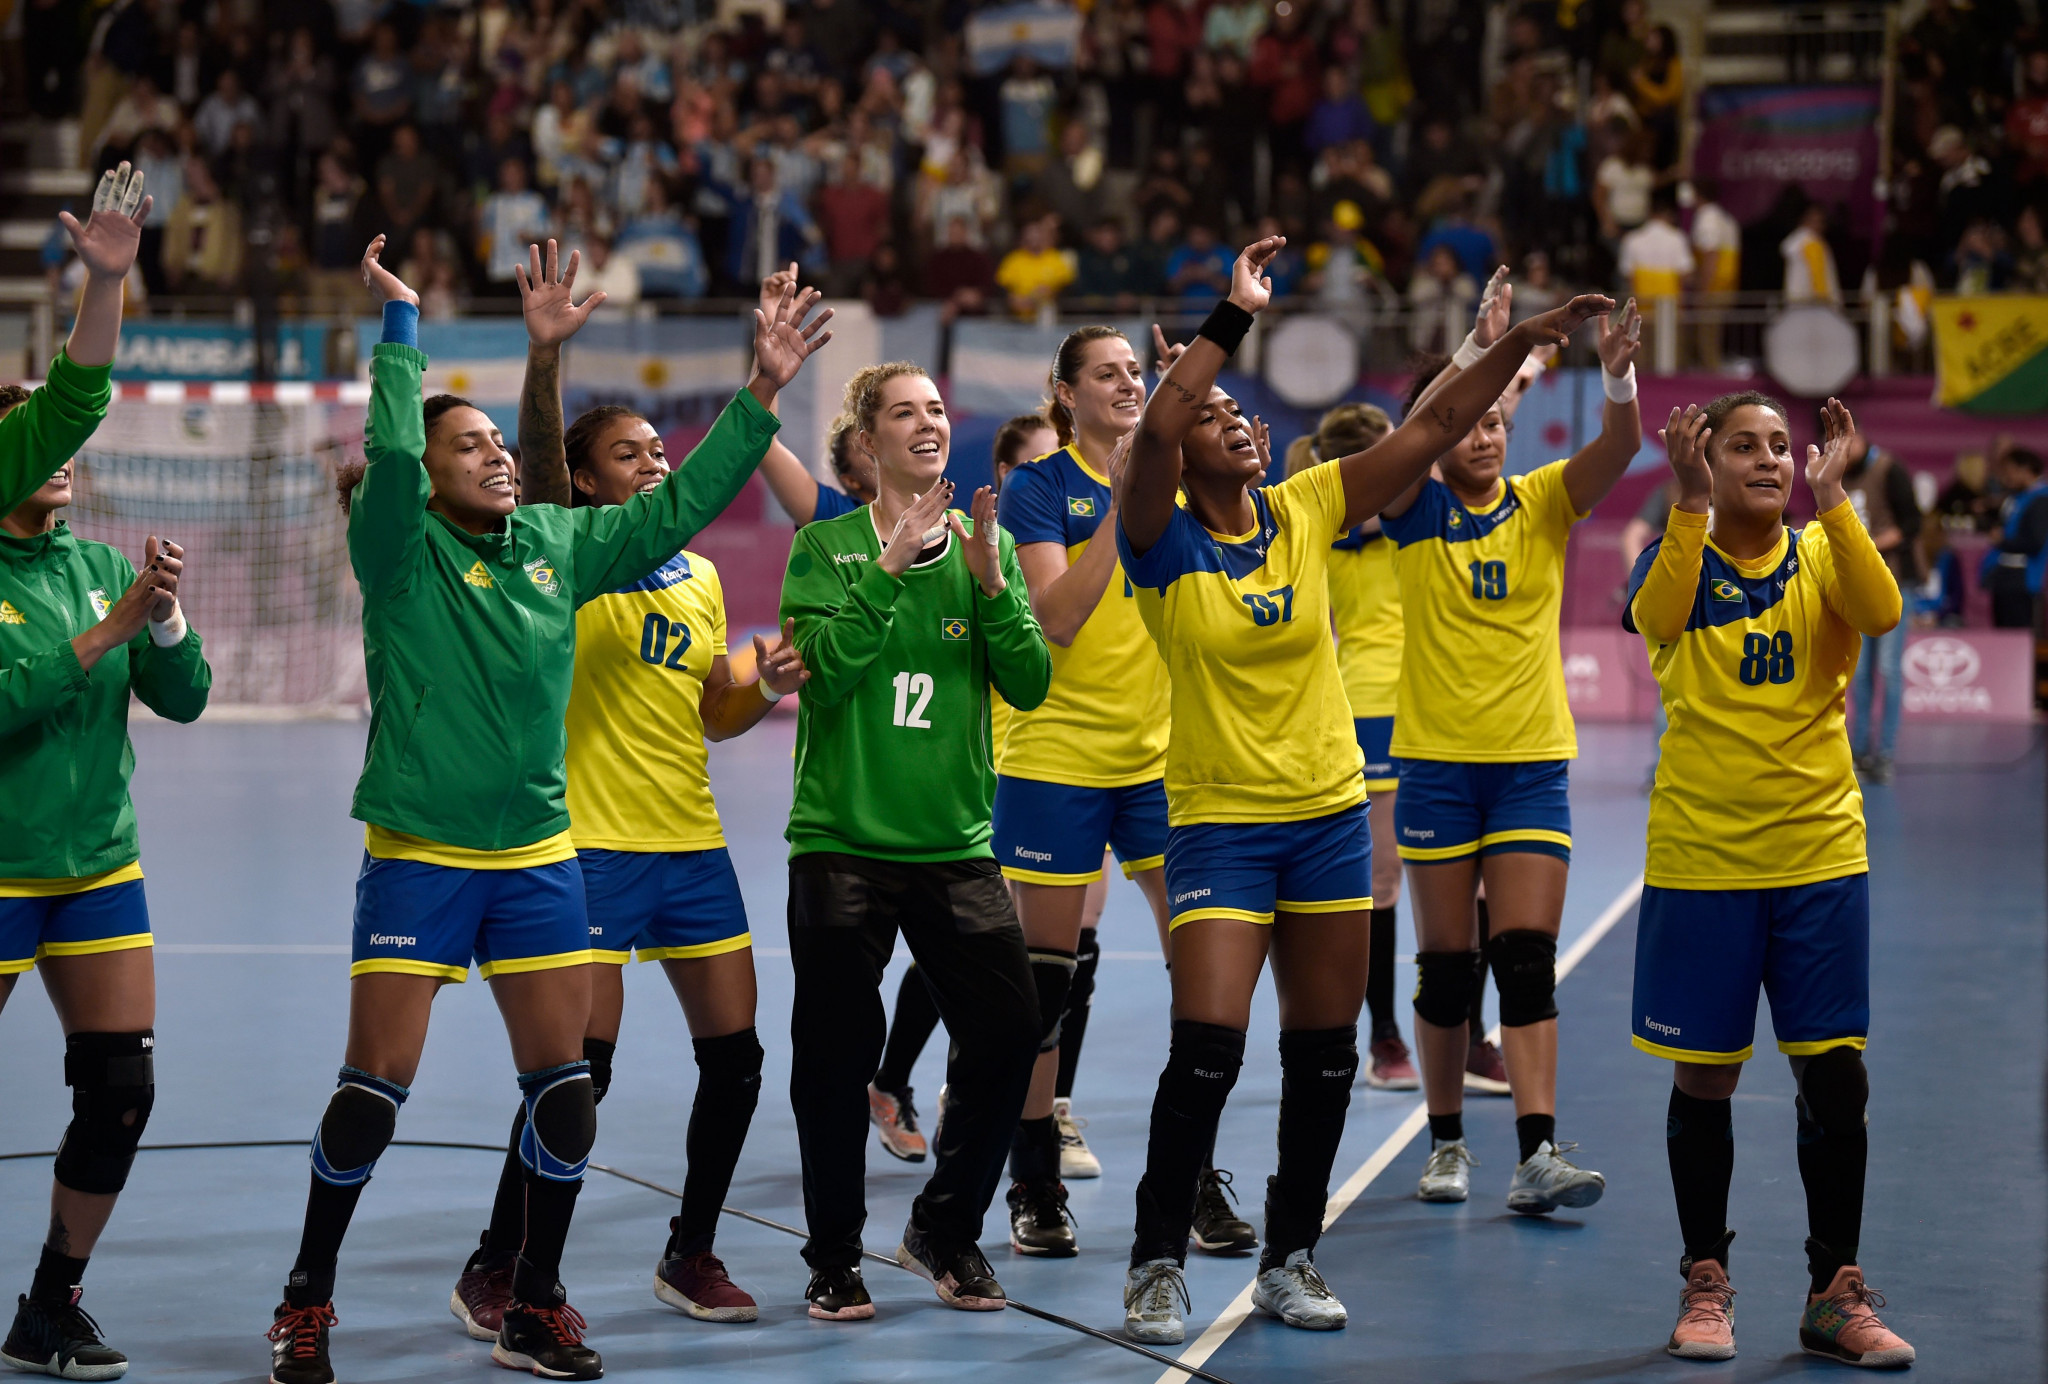 Brazil are seeking a seventh consecutive women's handball gold at the Pan American Games ©Getty Images